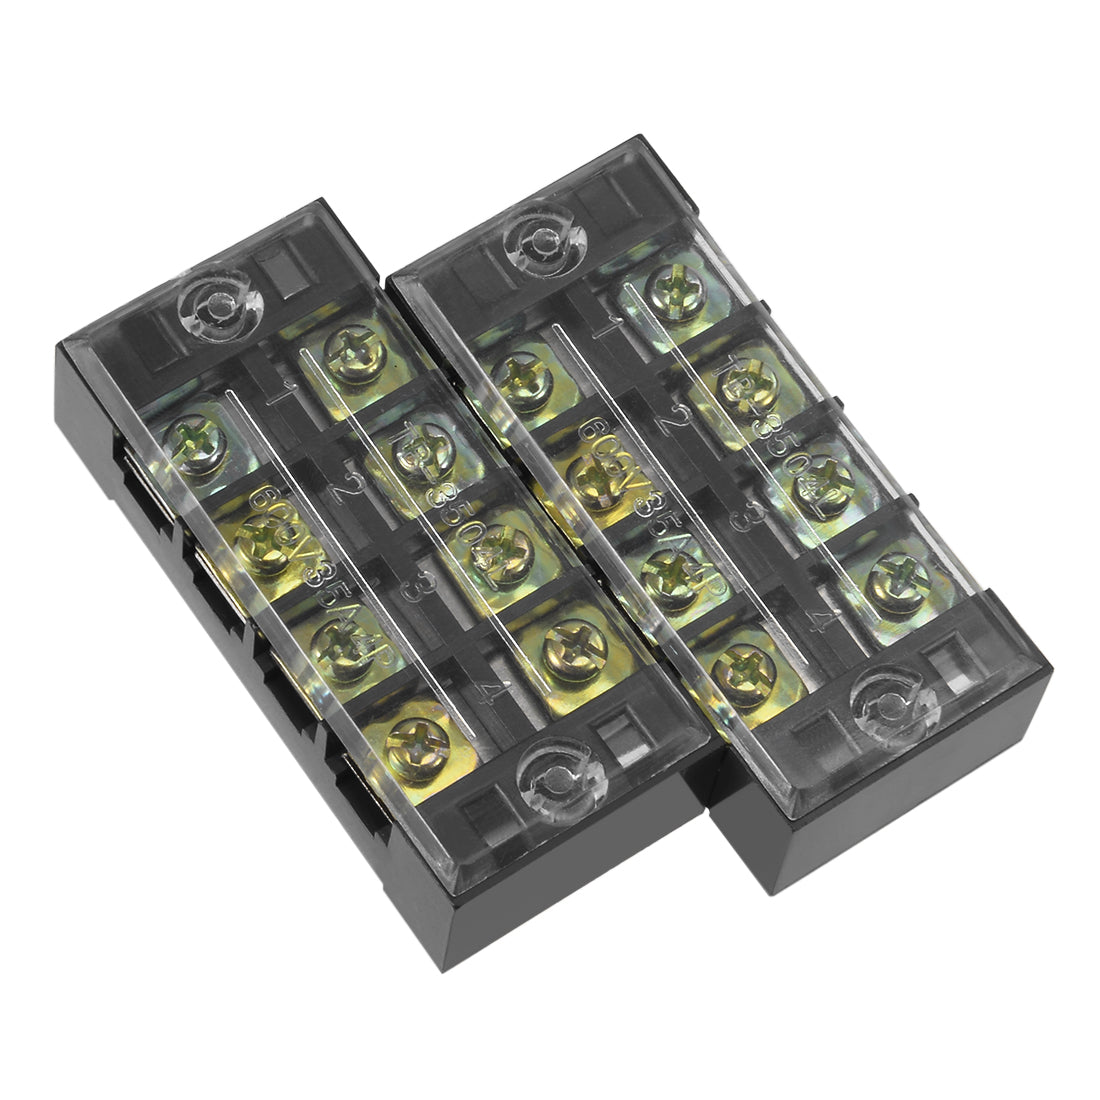 uxcell Uxcell 2 Pcs 4 Positions Dual Rows 600V 35A Wire Barrier Block Terminal Strip TB-3504L